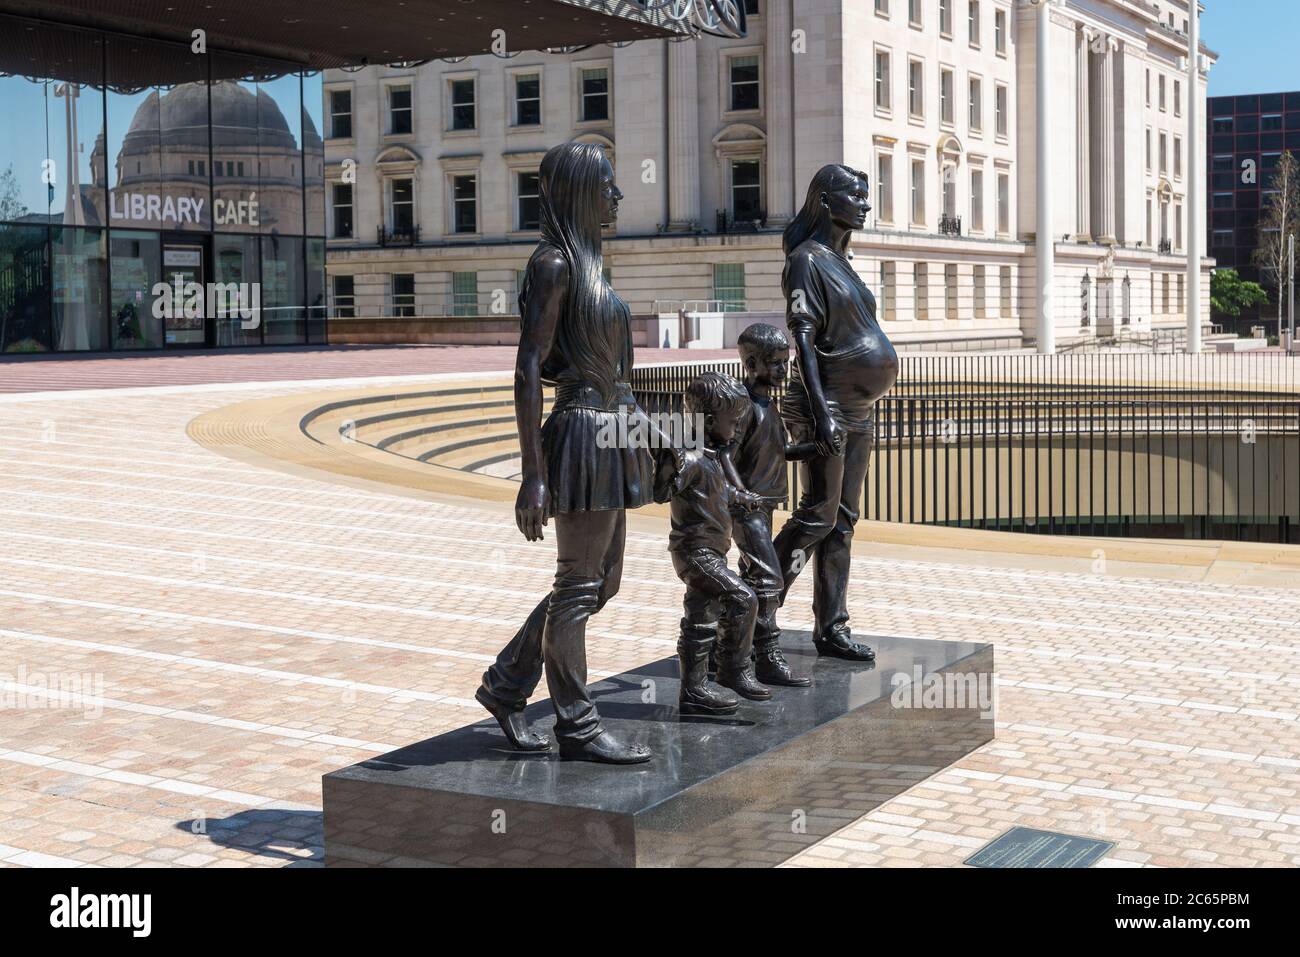 A Real Family of Birmingham sculpture cast in bronze by Gillian Wearing in Centenary Square, Birmingham, UK Stock Photo